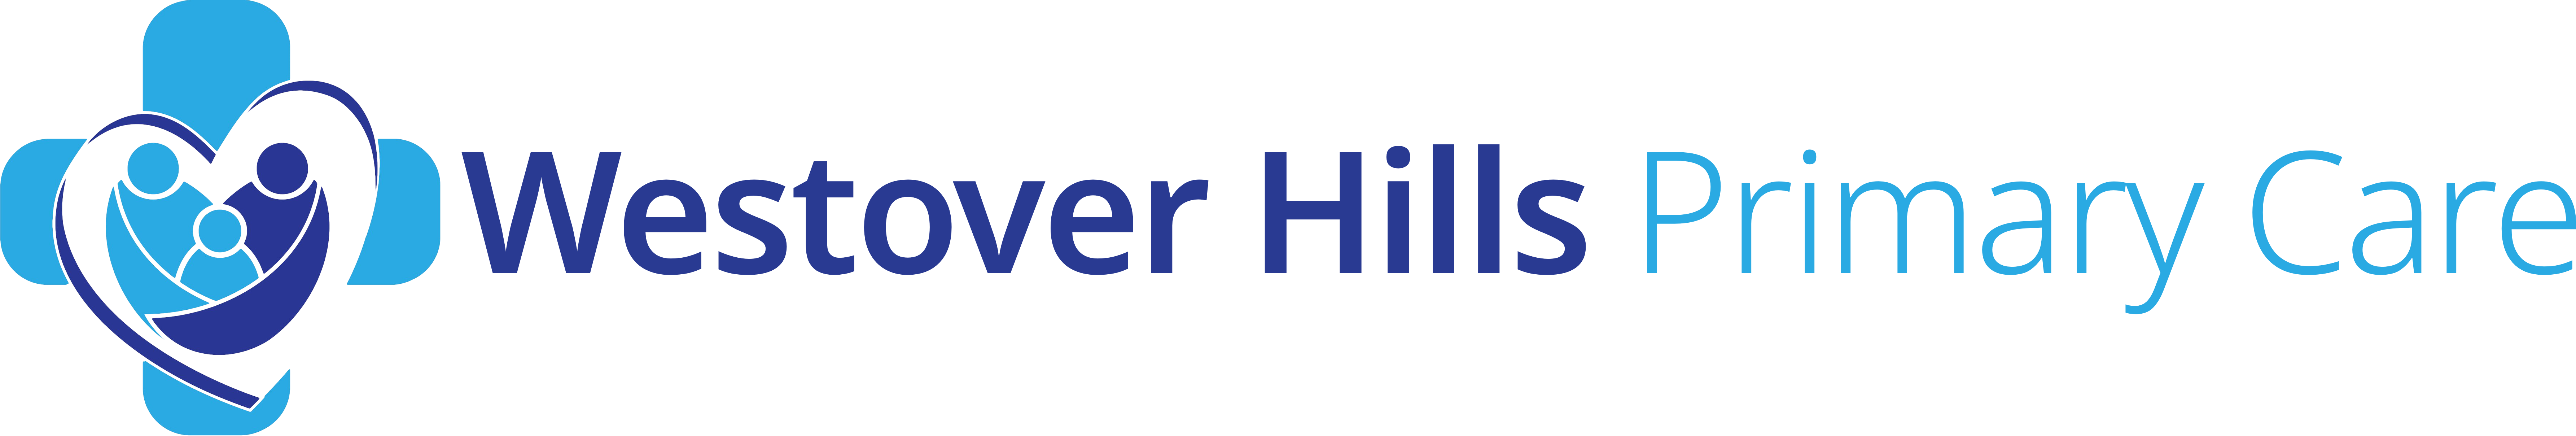 Westover Hills Primary Care logo